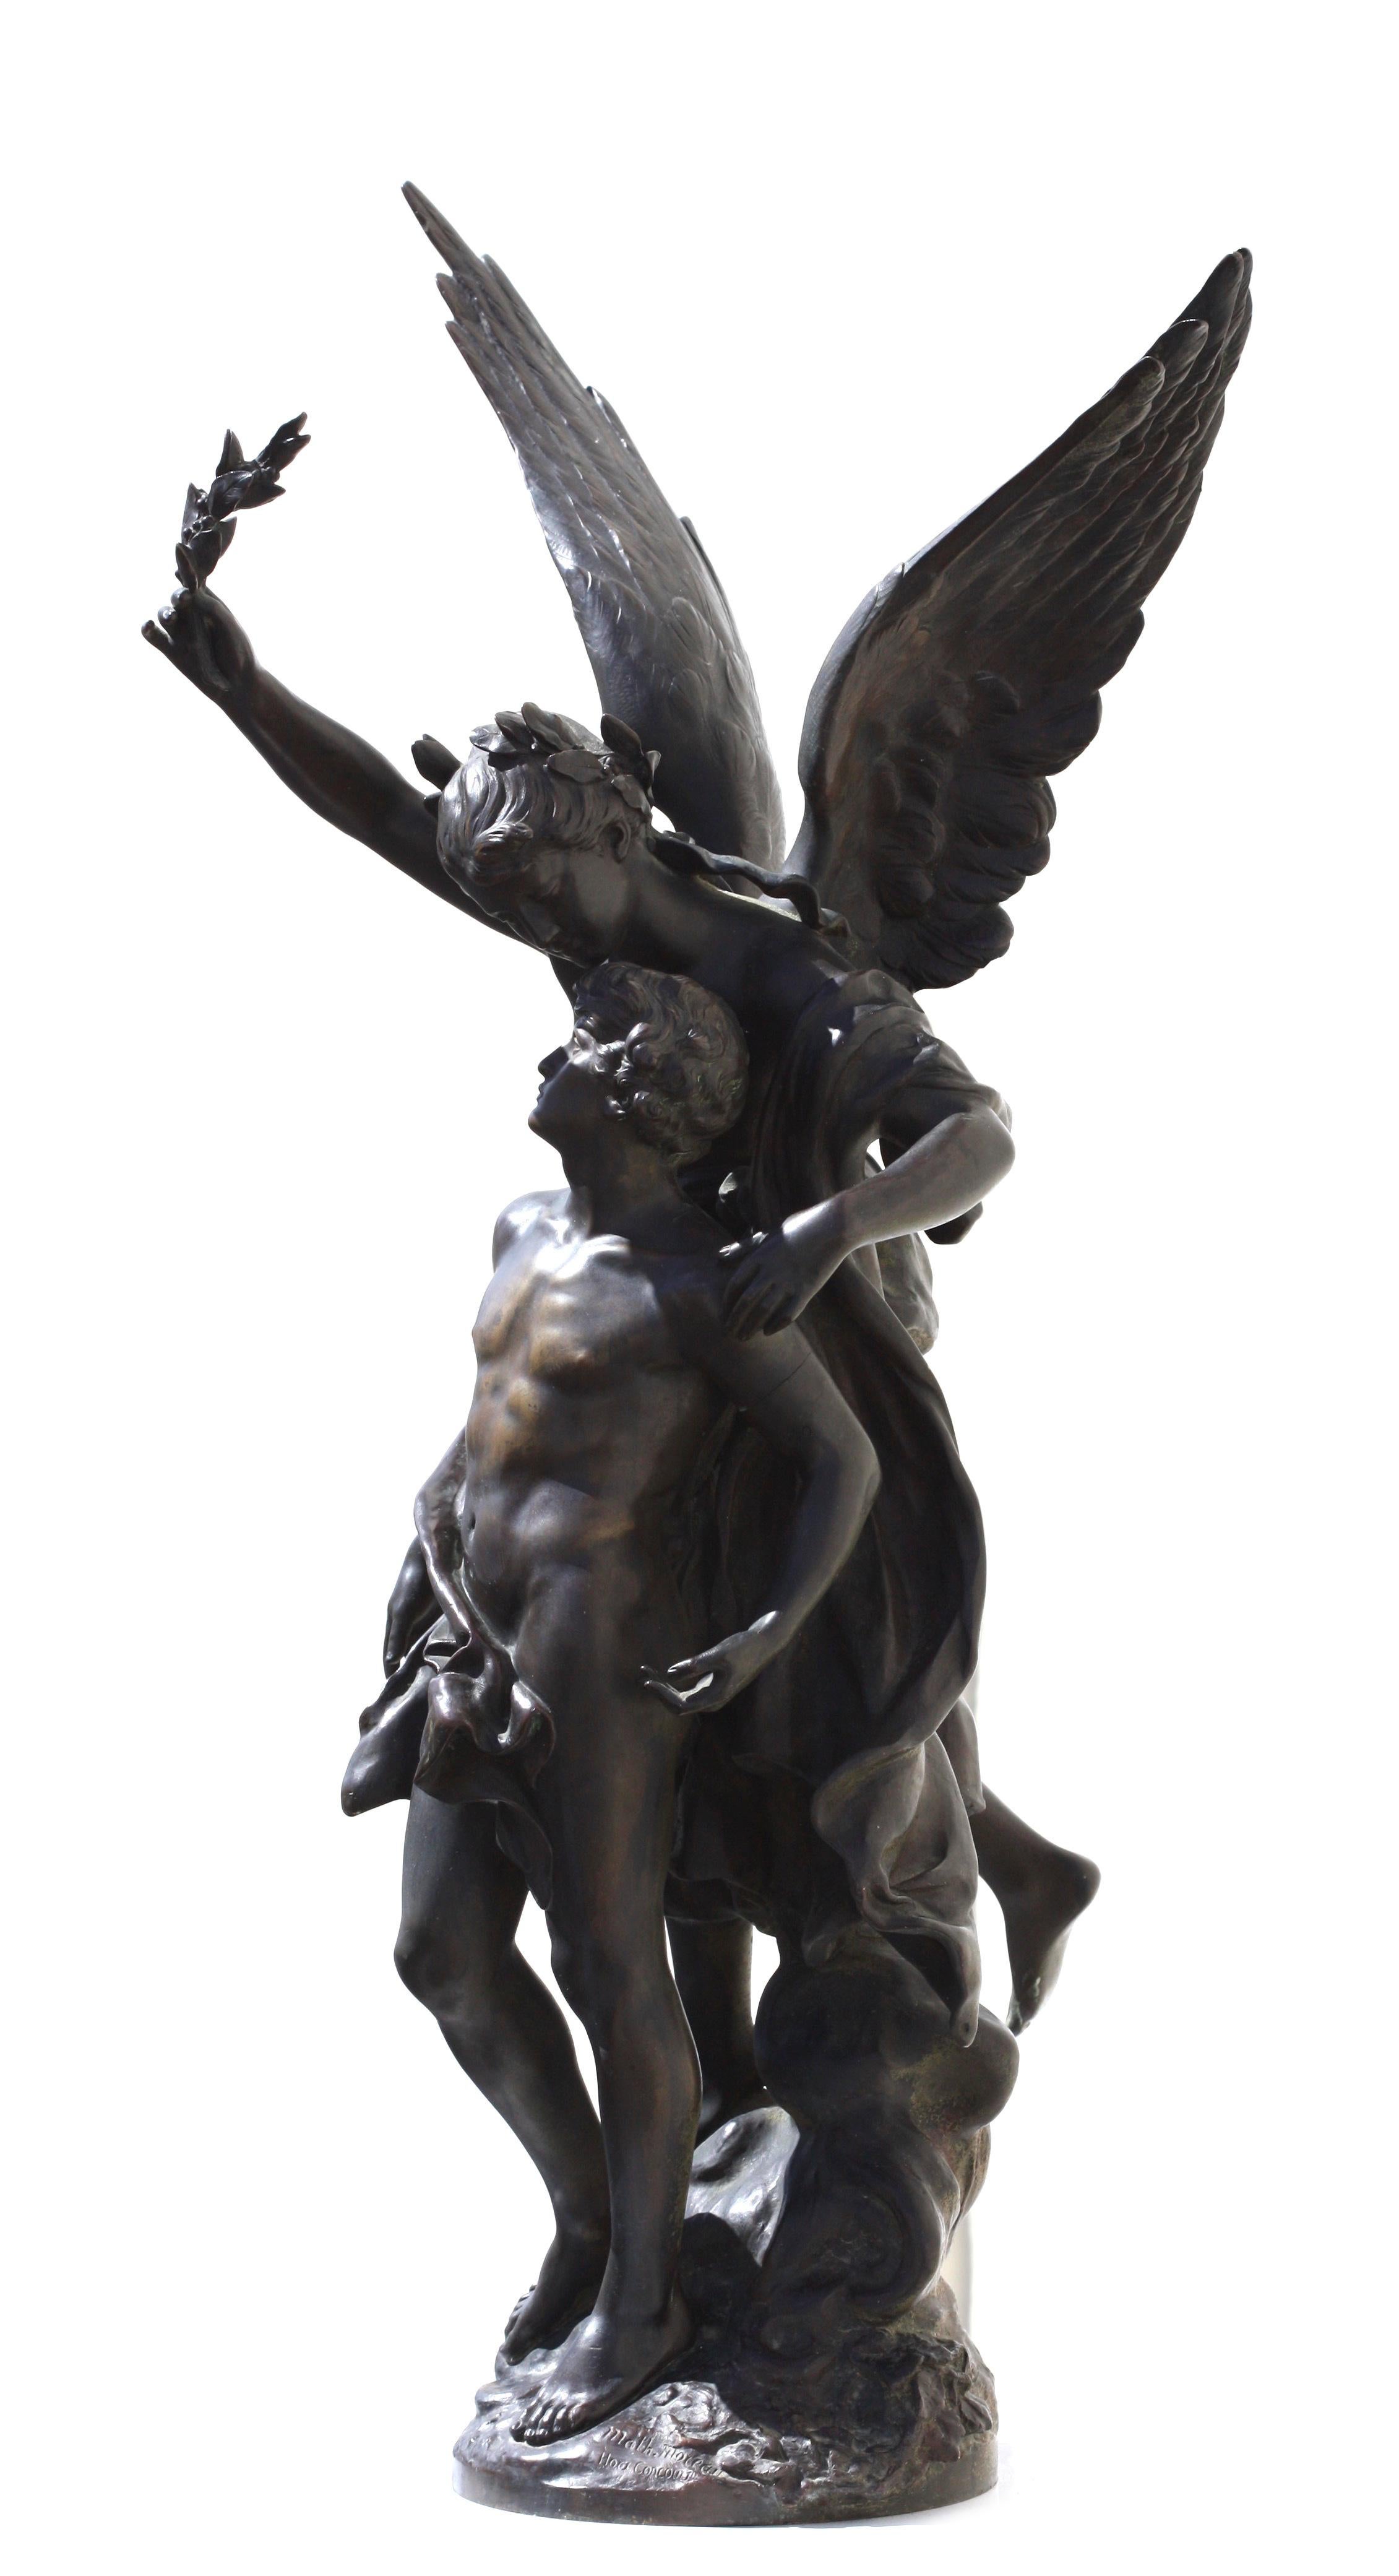 Mathurin Moreau (1822-1912).
A bronze sculpture La Torche (The Torch), French School
mid brown patina, finely cast and chiseled, signed Math Moreau 
 Hors Concours
 Height to top of wing 29 in. (73.66 cm.) 
 Width 12 in. (30.48